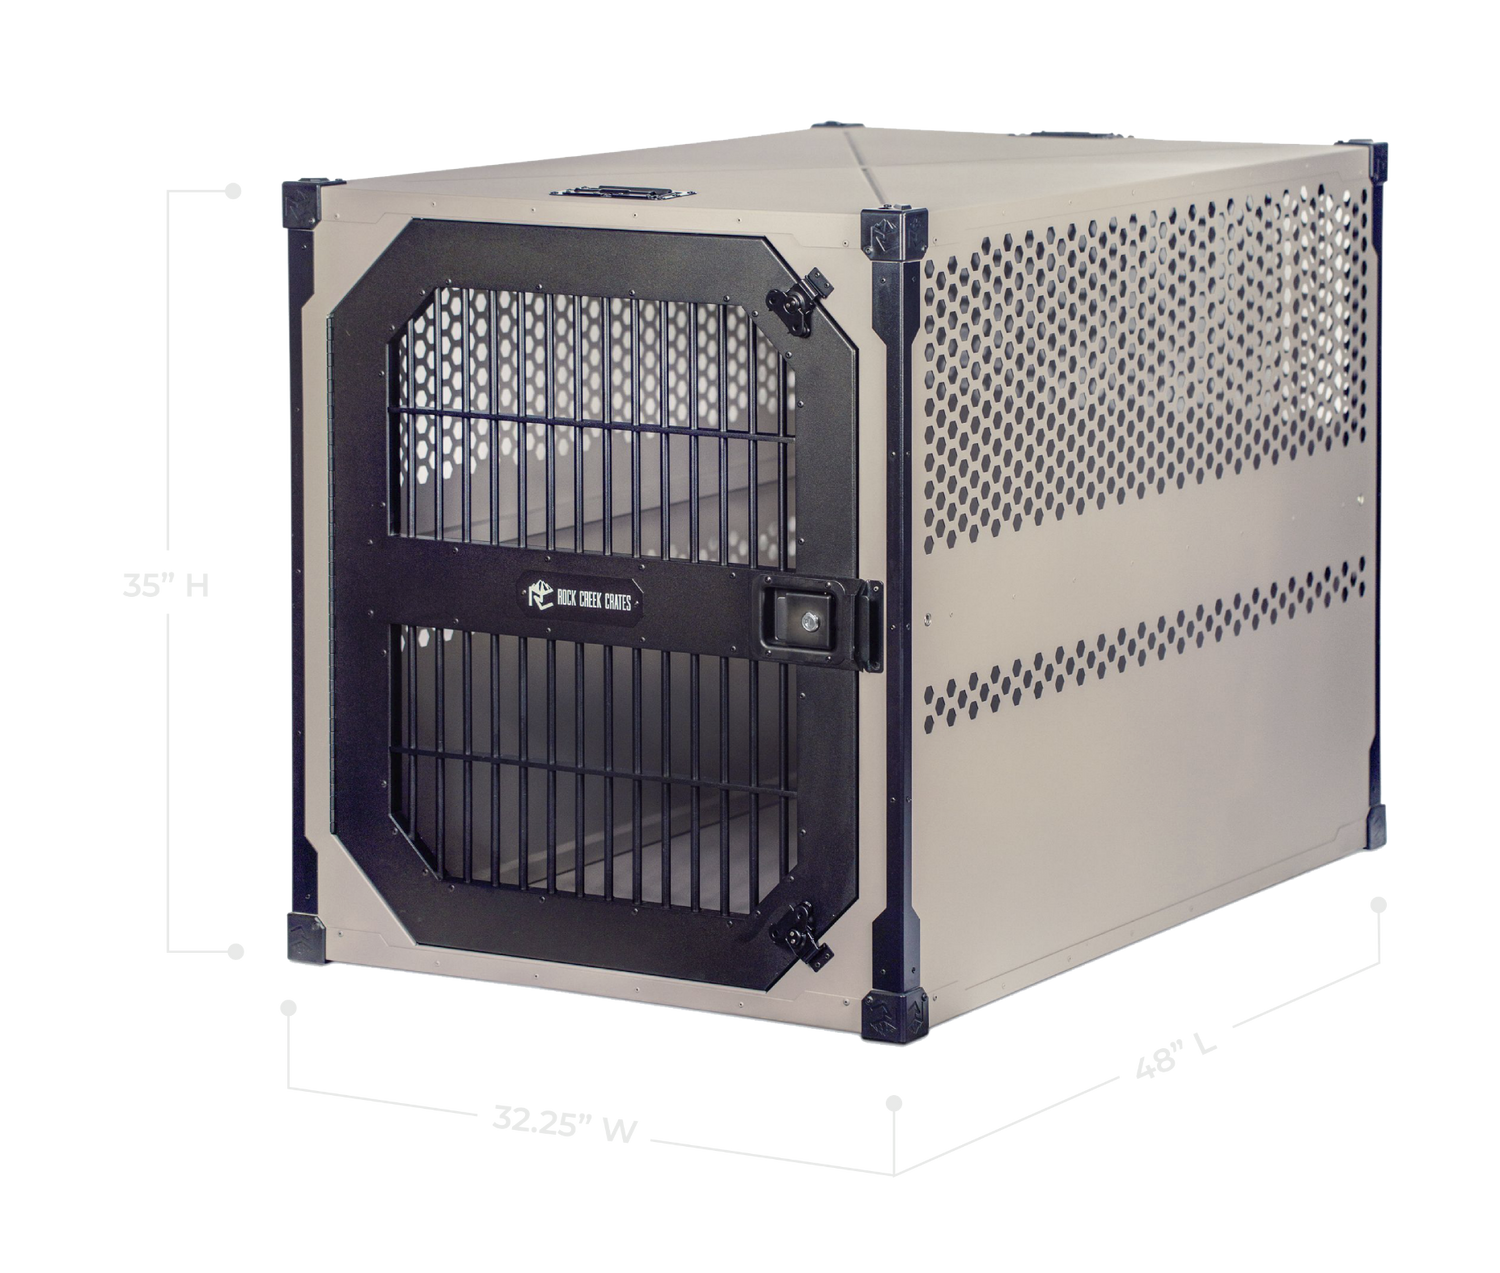 XX-Large stationary dog crate by Rock Creek Crates showing external dimensions